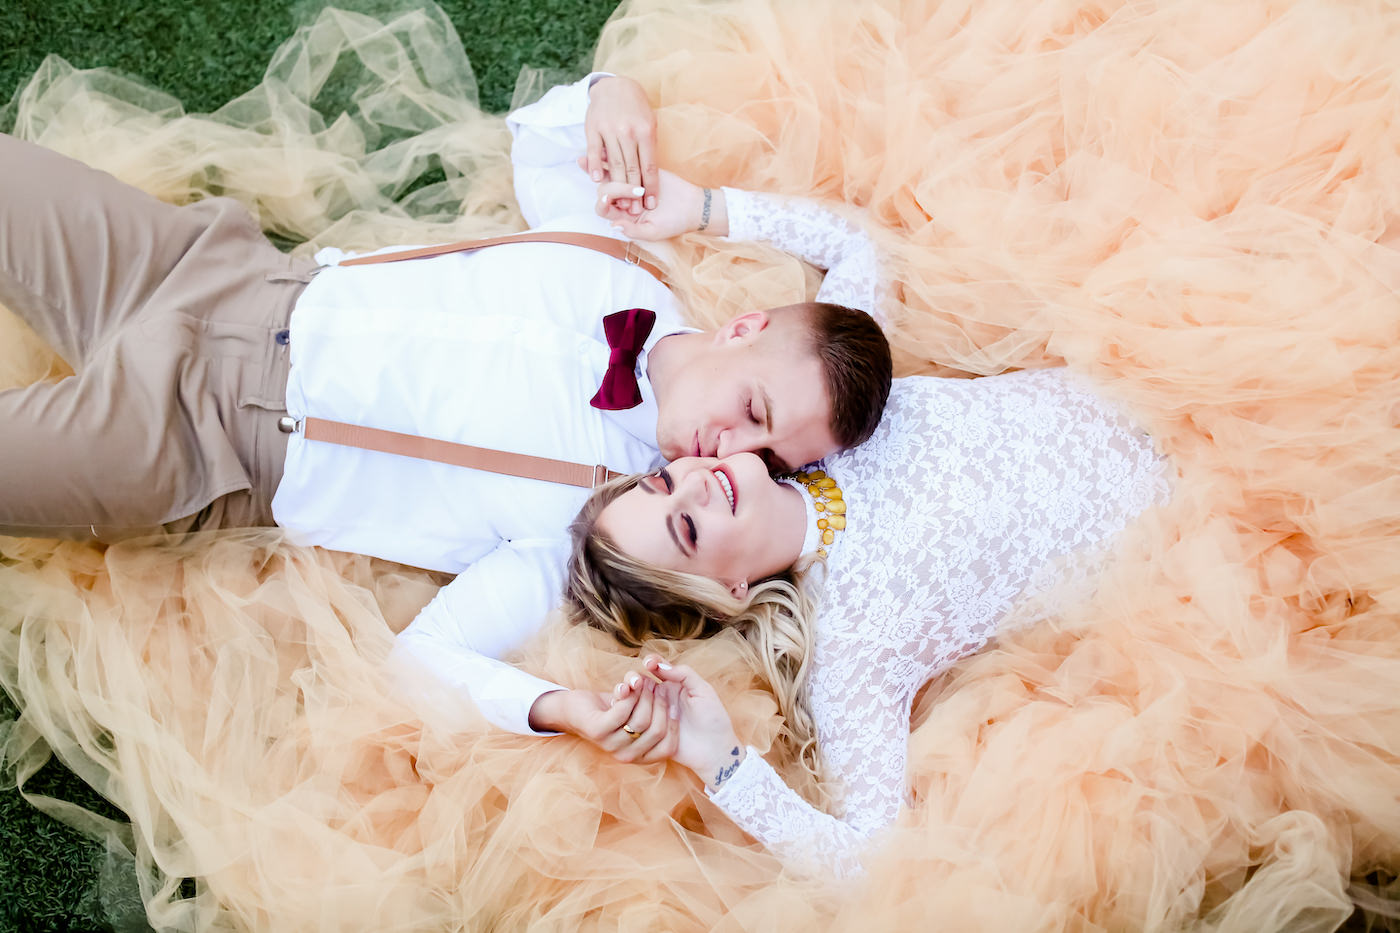 Bohemian Inspired Tampa Bay Bride and Groom Creative Wedding Portrait, Boho Bride Wearing Oversized Blush Orange Long Tulle Skirt, White Lace and Illusion Long Sleeve Top, Yellow Necklace, Groom in Brown Suit with Suspenders and Velvet Bowtie | Downtown St. Petersburg Wedding Planner Blue Skies Weddings and Events | Florida Wedding Photographer Lifelong Photography Studio